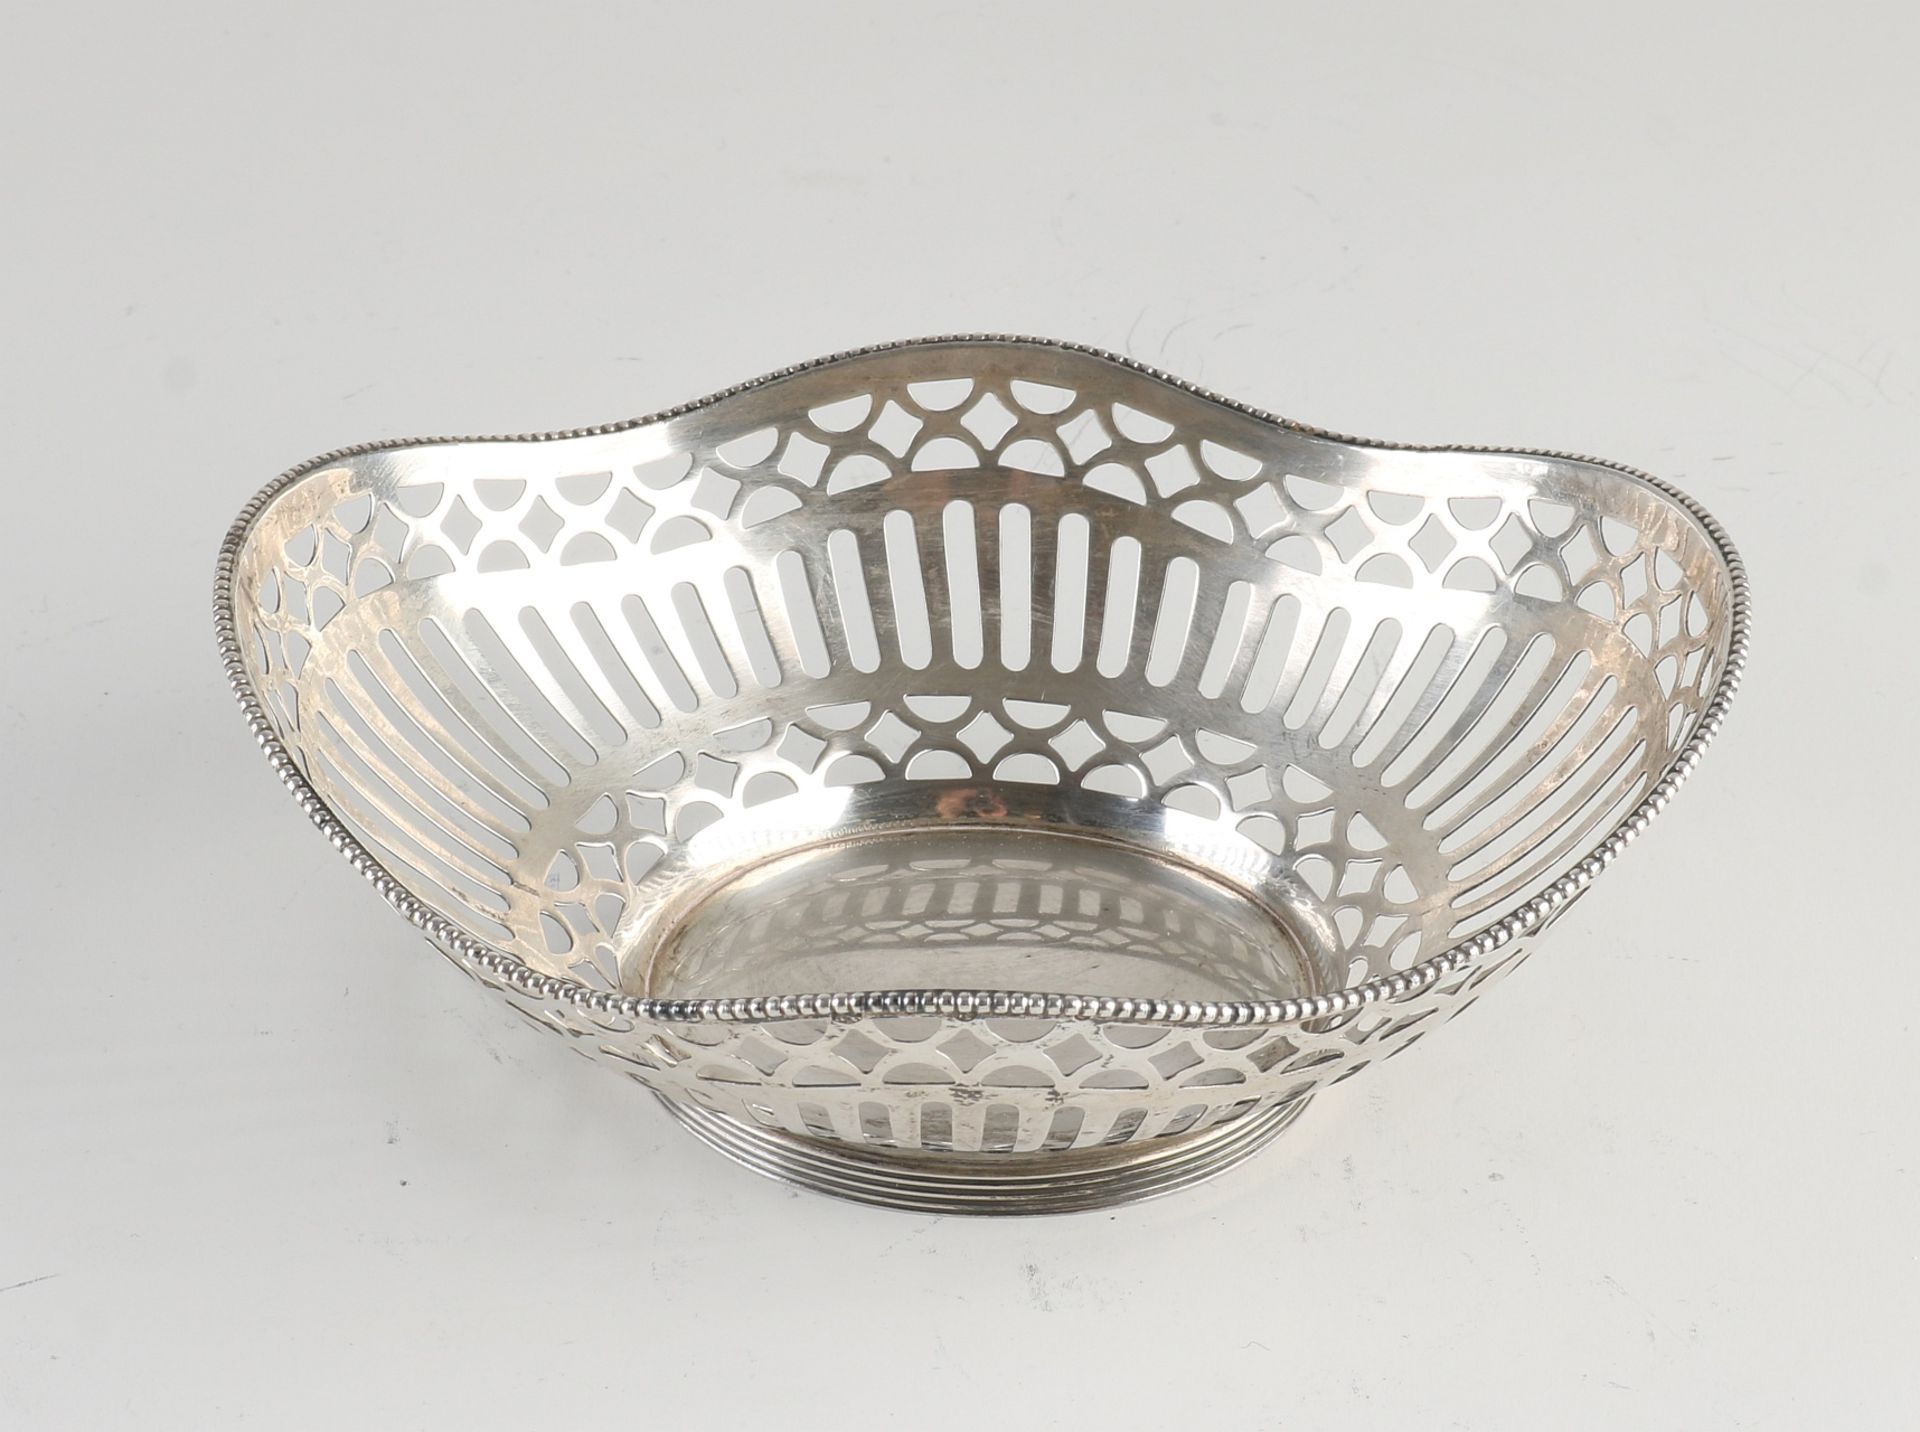 Silver candy basket - Image 2 of 2